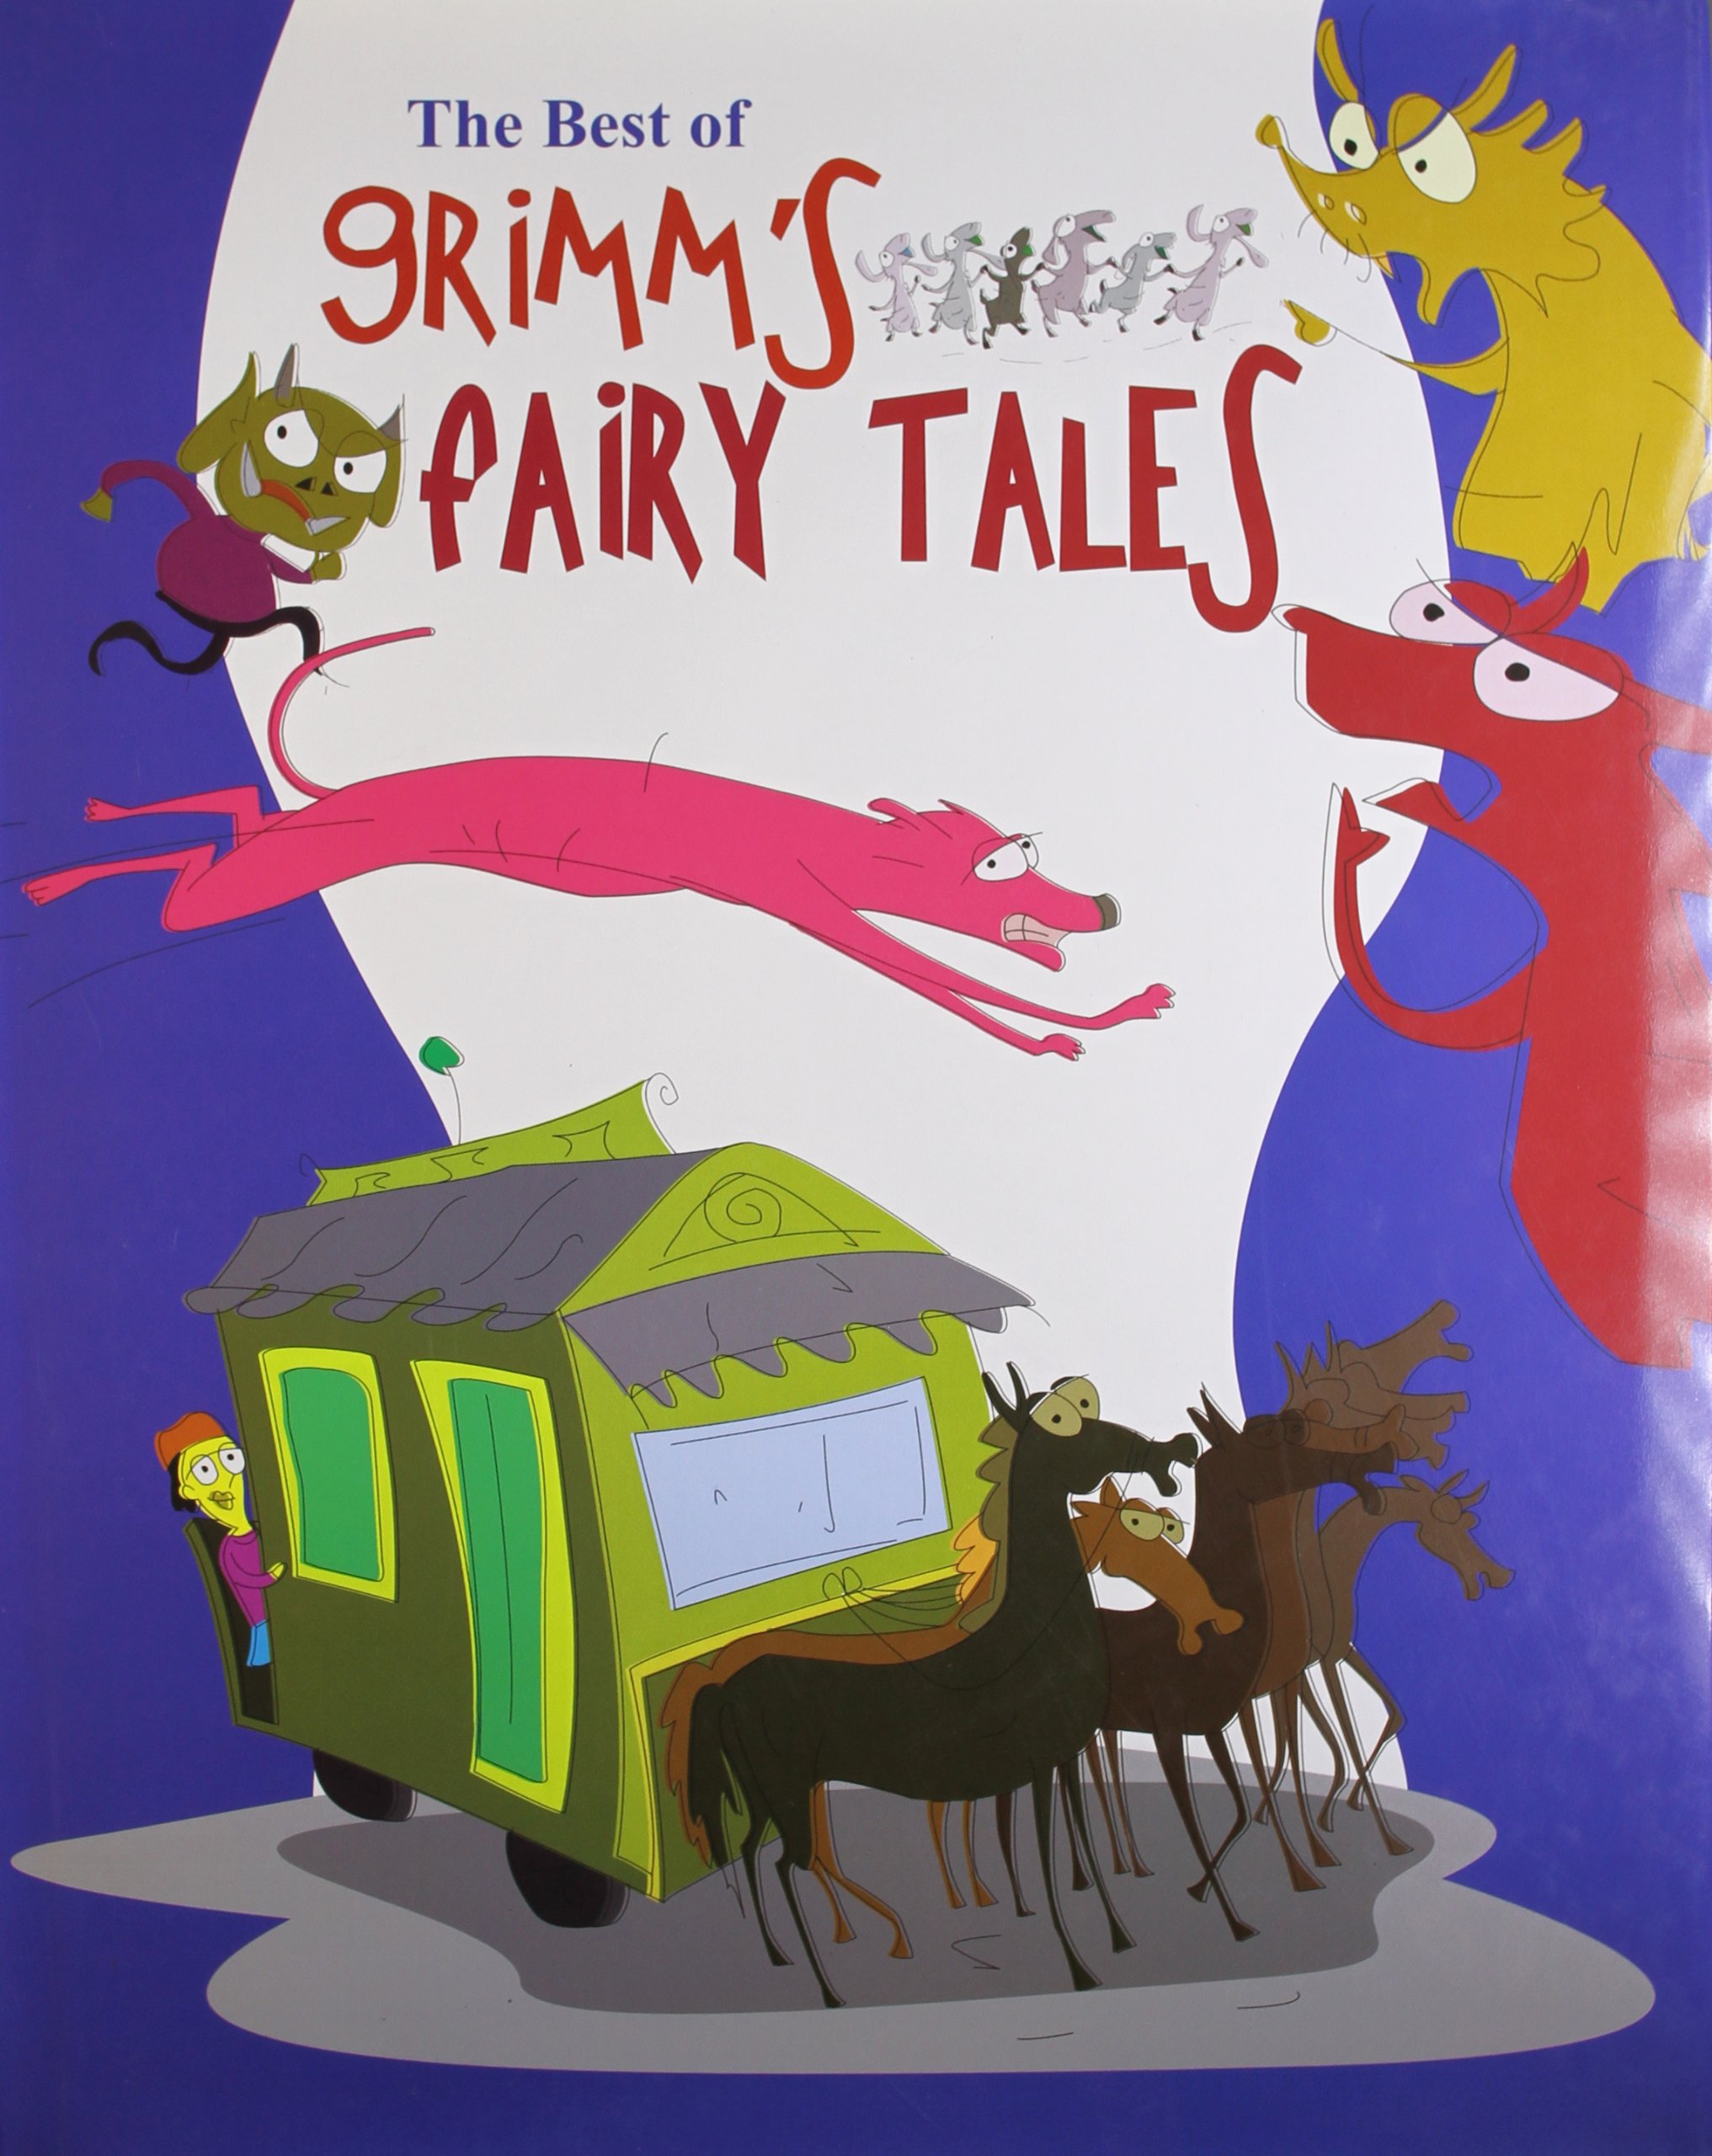 Grimms Fairy tales : The Best of Grimms Fairy tales